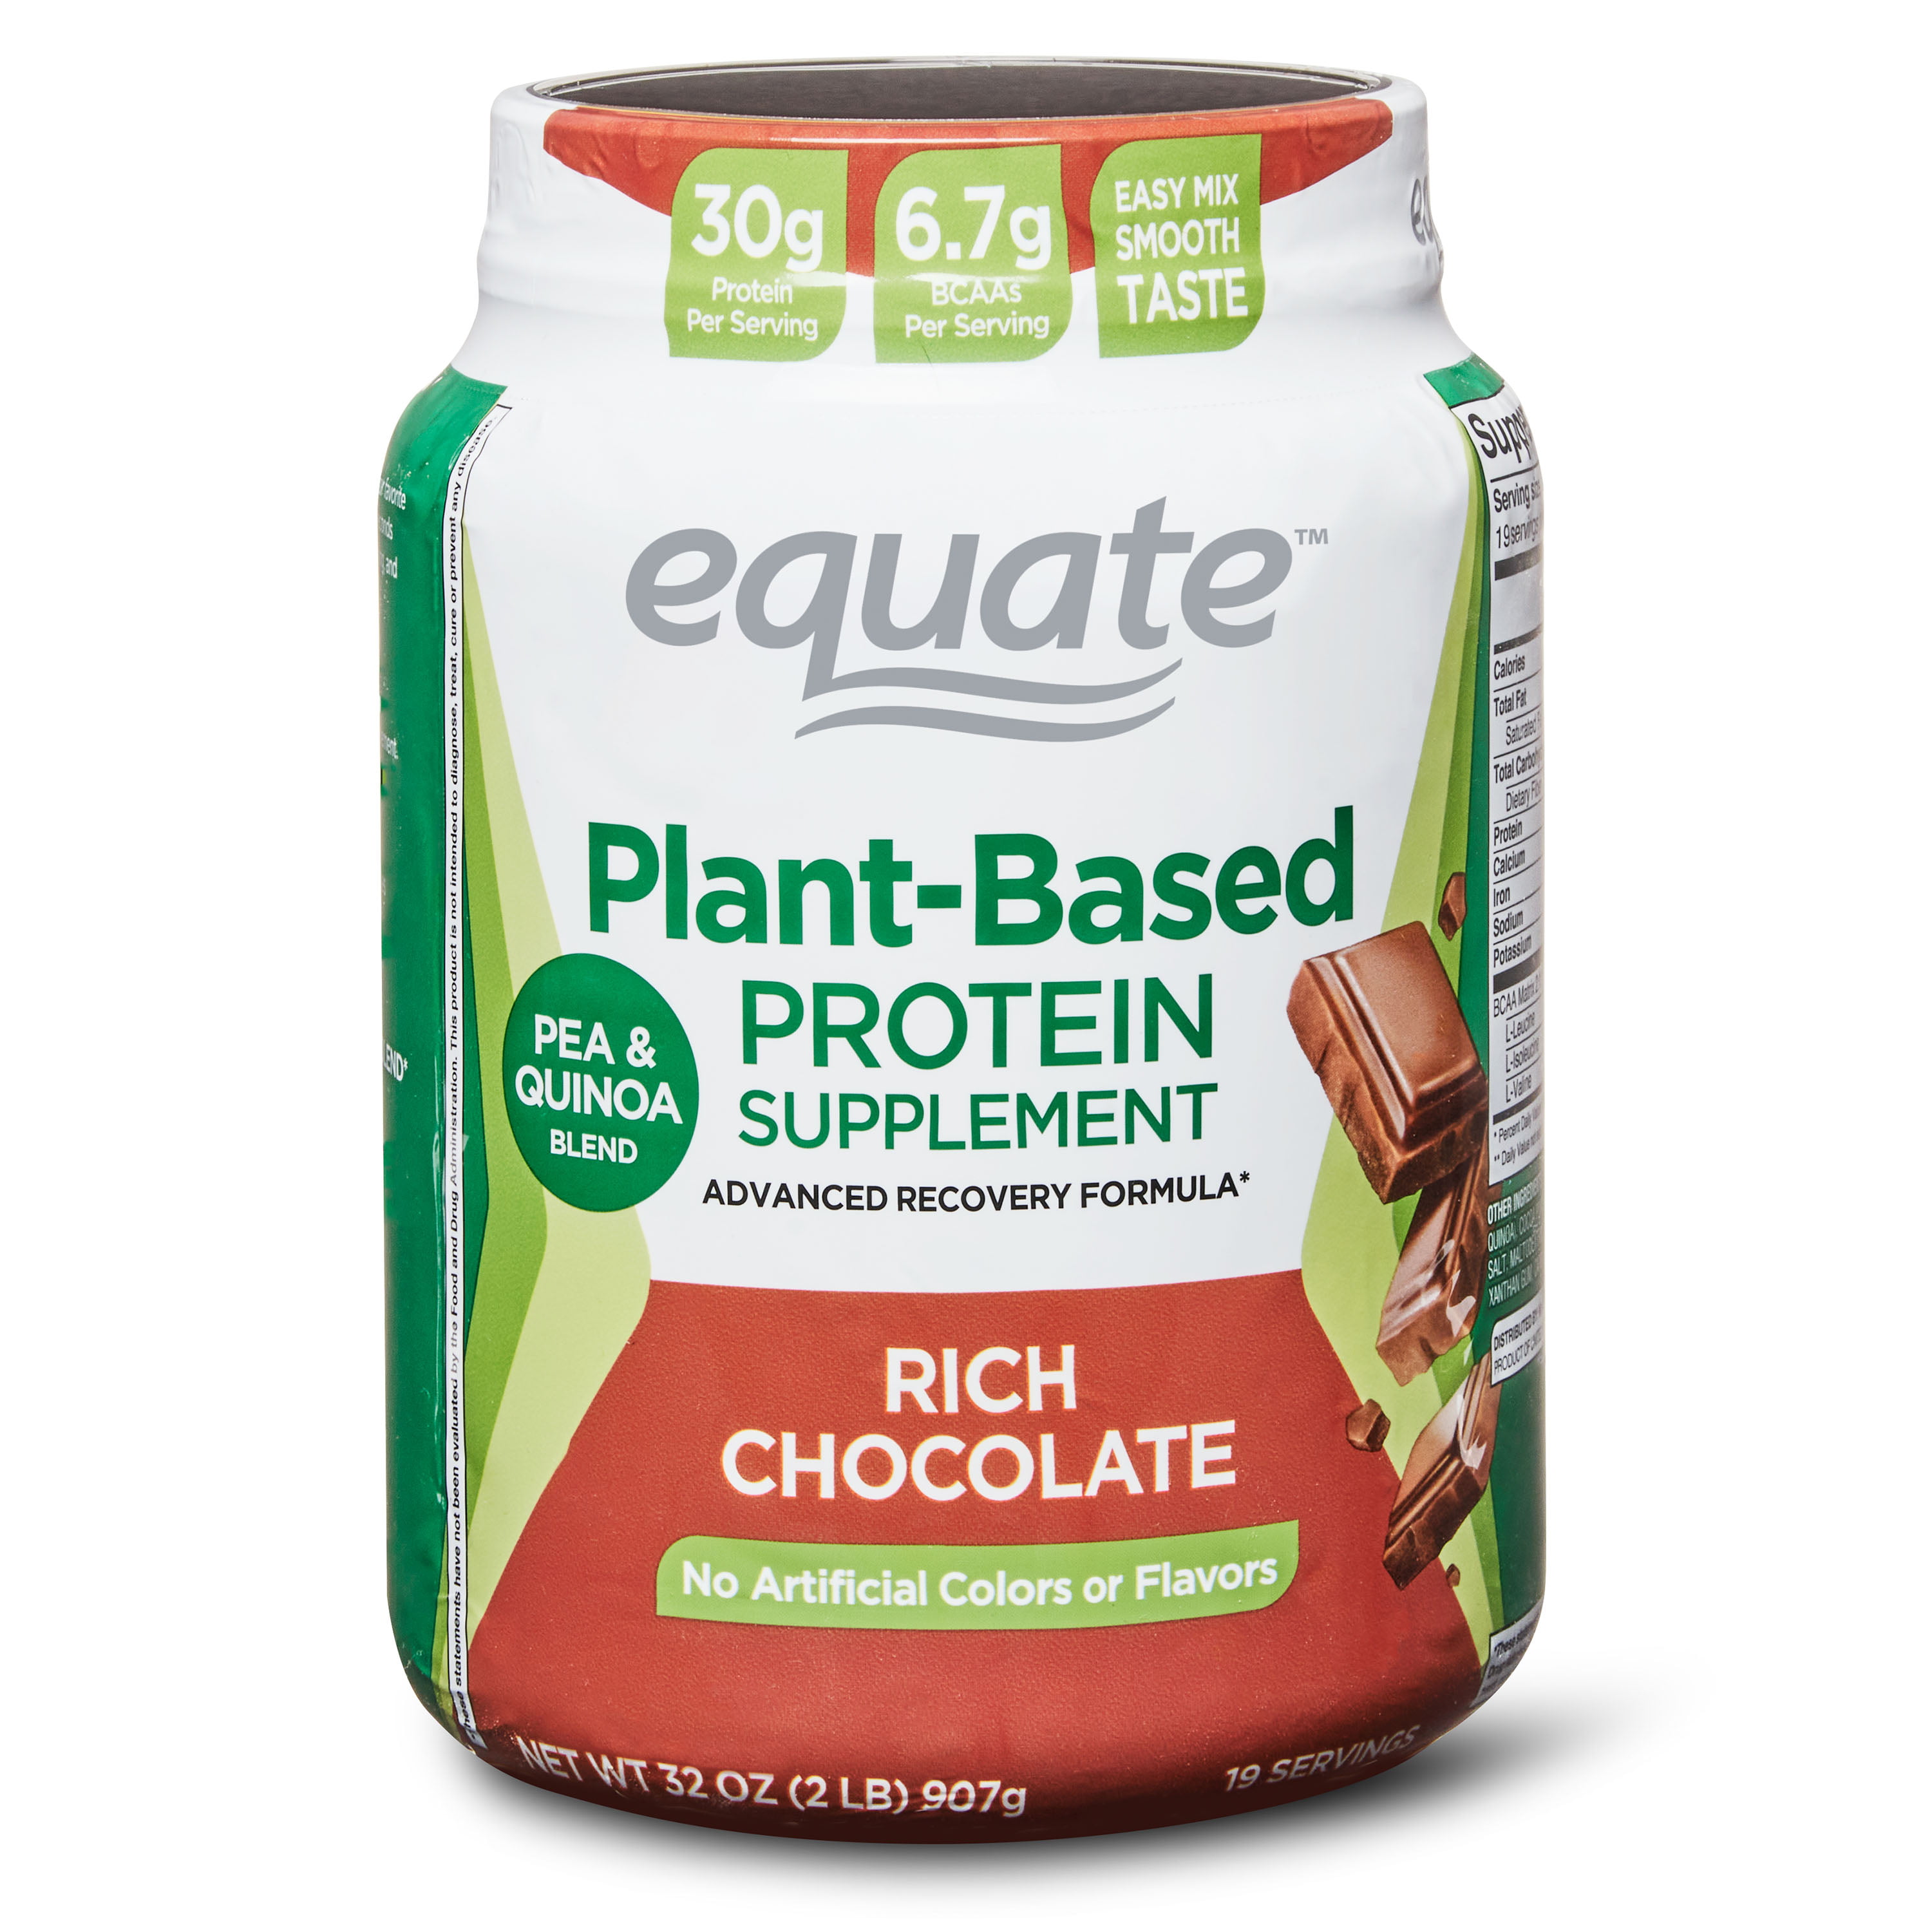 Equate Plant Based Protein Supplement, Rich Chocolate | Advanced Recovery Formula with Pea & Quinoa Blend. 6.7 grams of Bcaa's per serving, 30 grams of Protein per serving | 2 LBs of plant protein